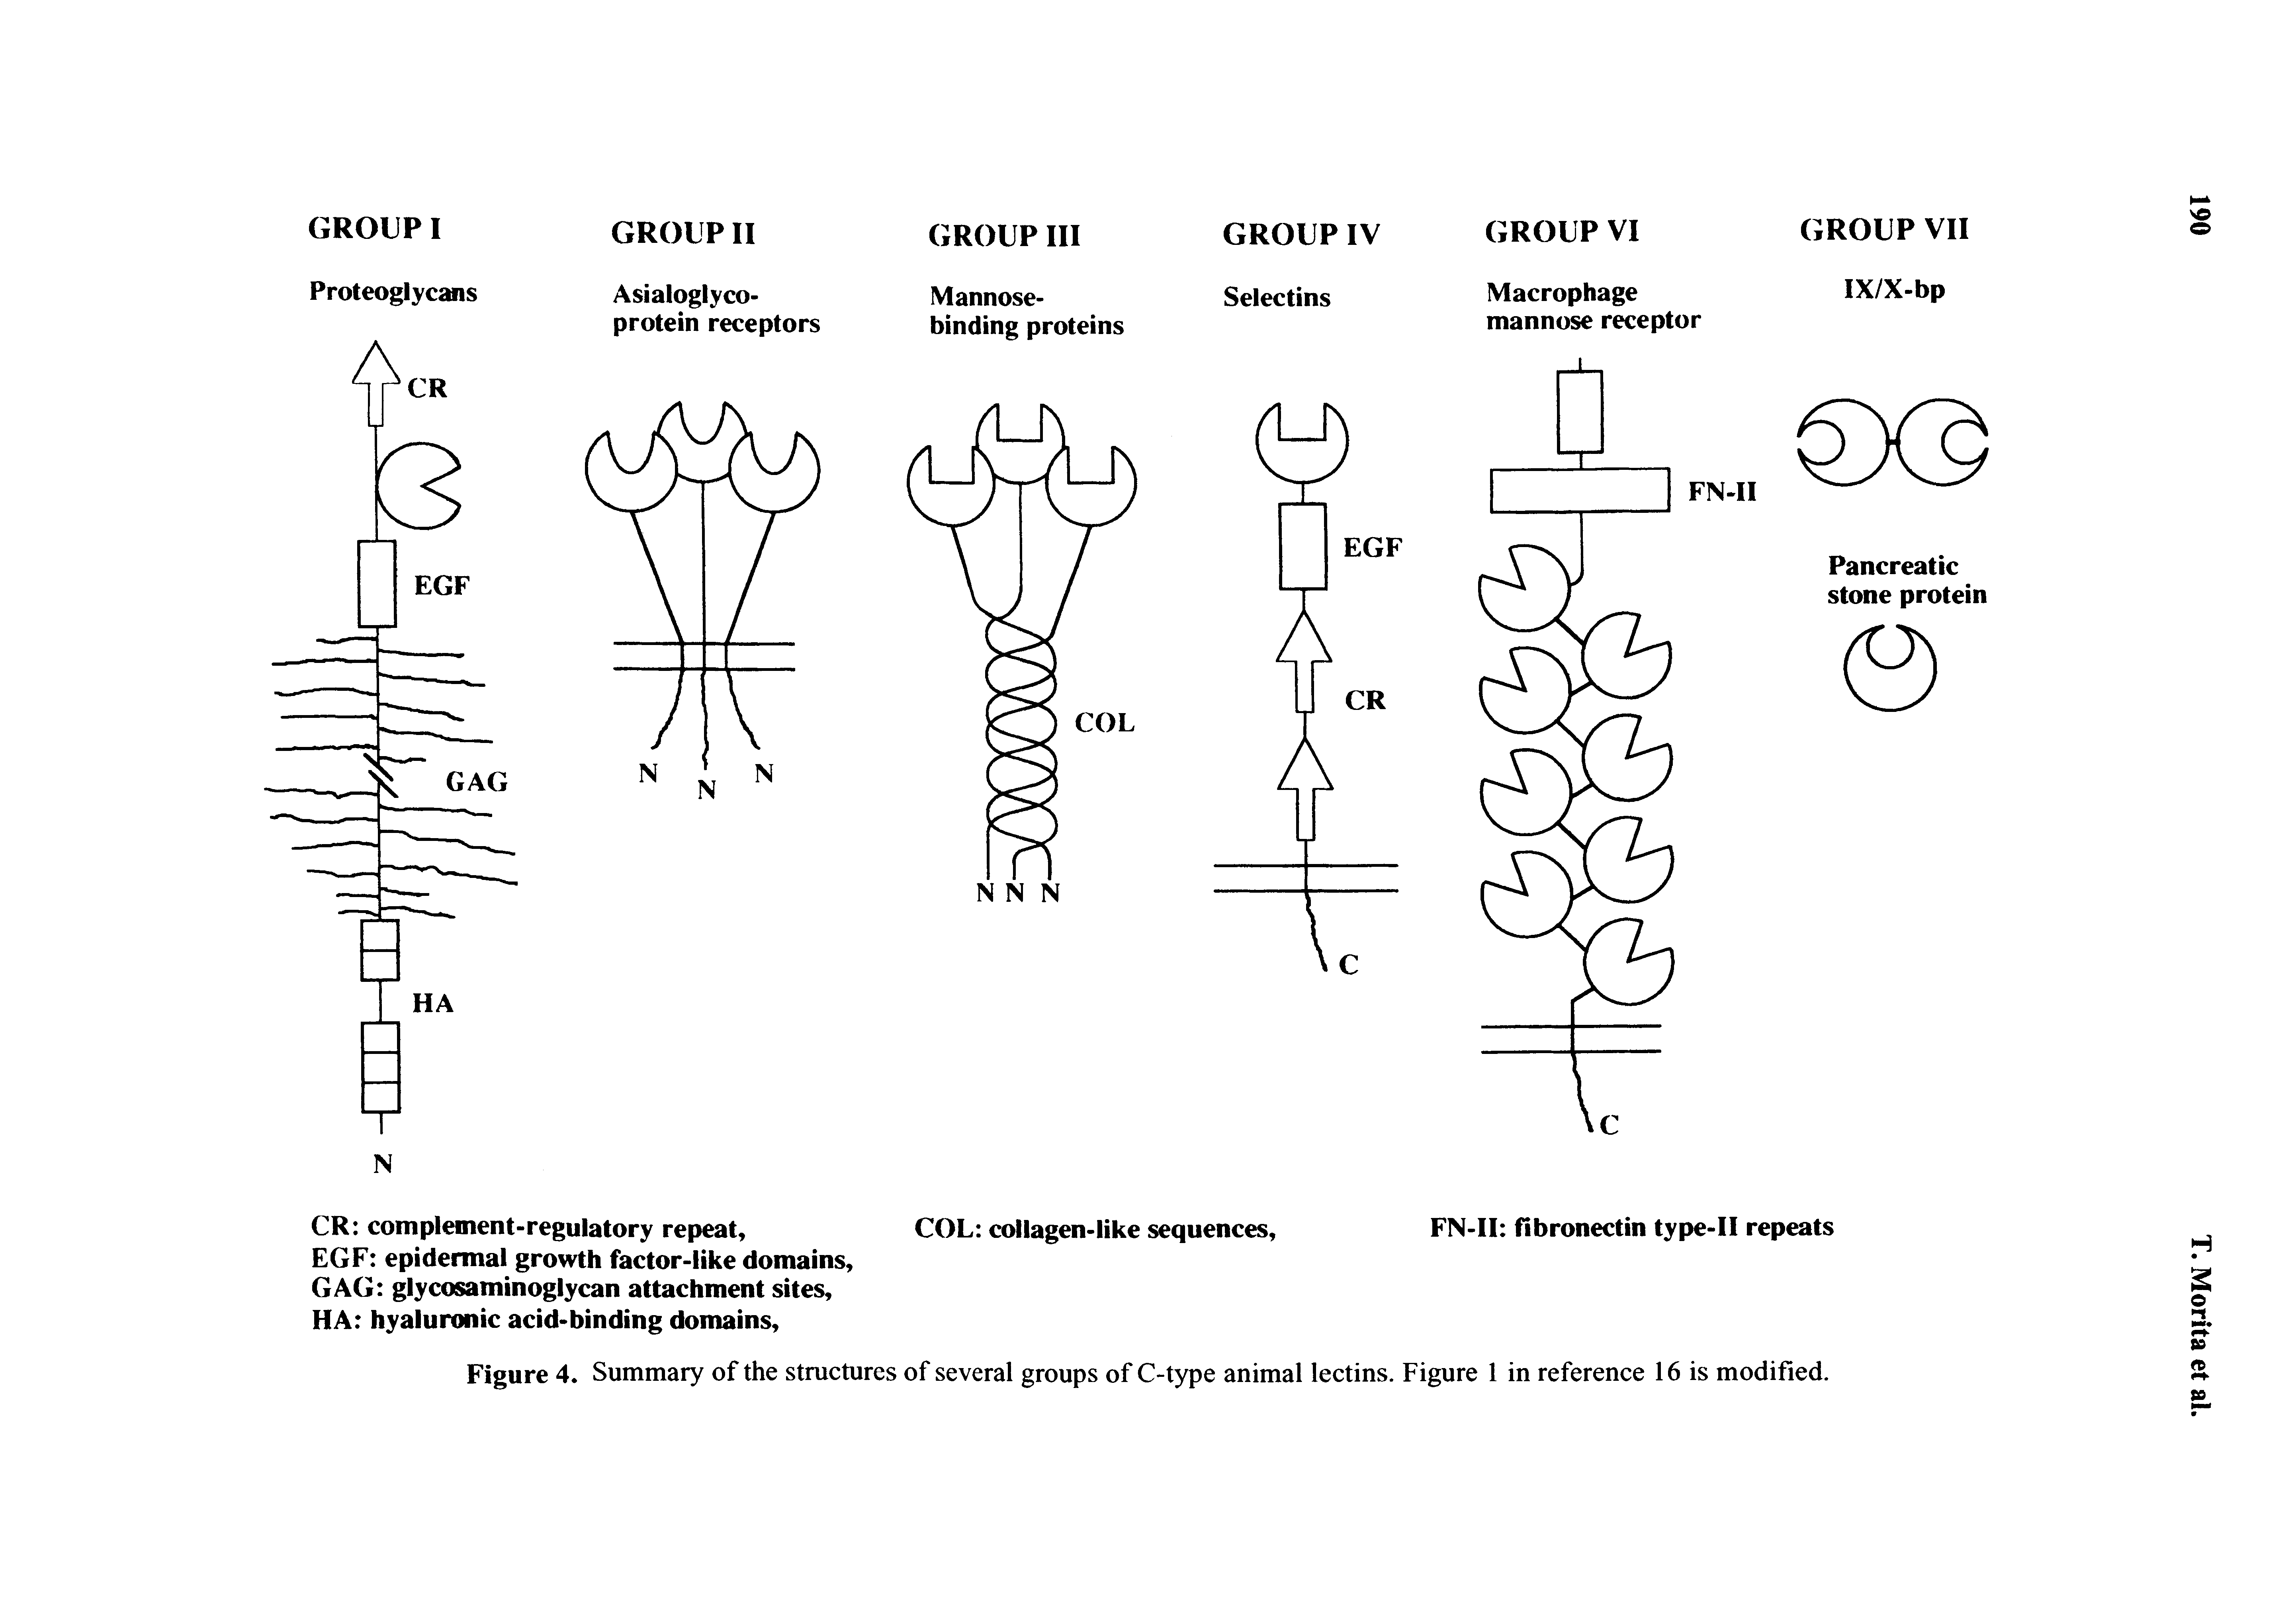 Figure 4. Summary of the structures of several groups of C-type animal lectins. Figure 1 in reference 16 is modified.